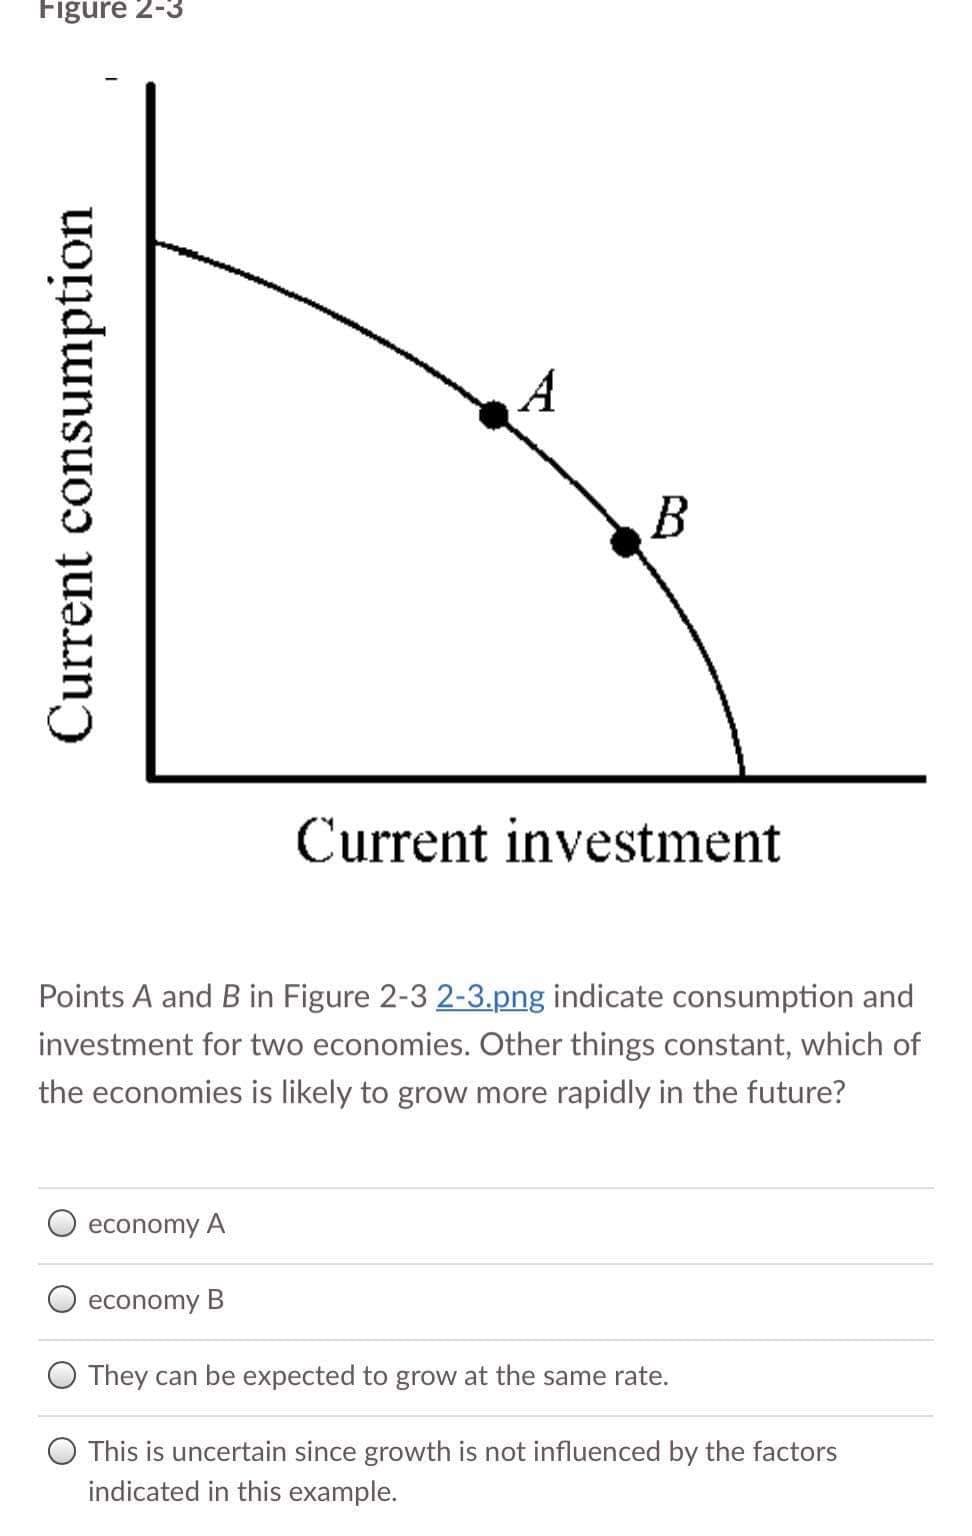 Figure 2-3
A
В
Current investment
Points A and B in Figure 2-3 2-3.png indicate consumption and
investment for two economies. Other things constant, which of
the economies is likely to grow more rapidly in the future?
economy A
economy B
O They can be expected to grow at the same rate.
O This is uncertain since growth is not influenced by the factors
indicated in this example.
Current consumption
